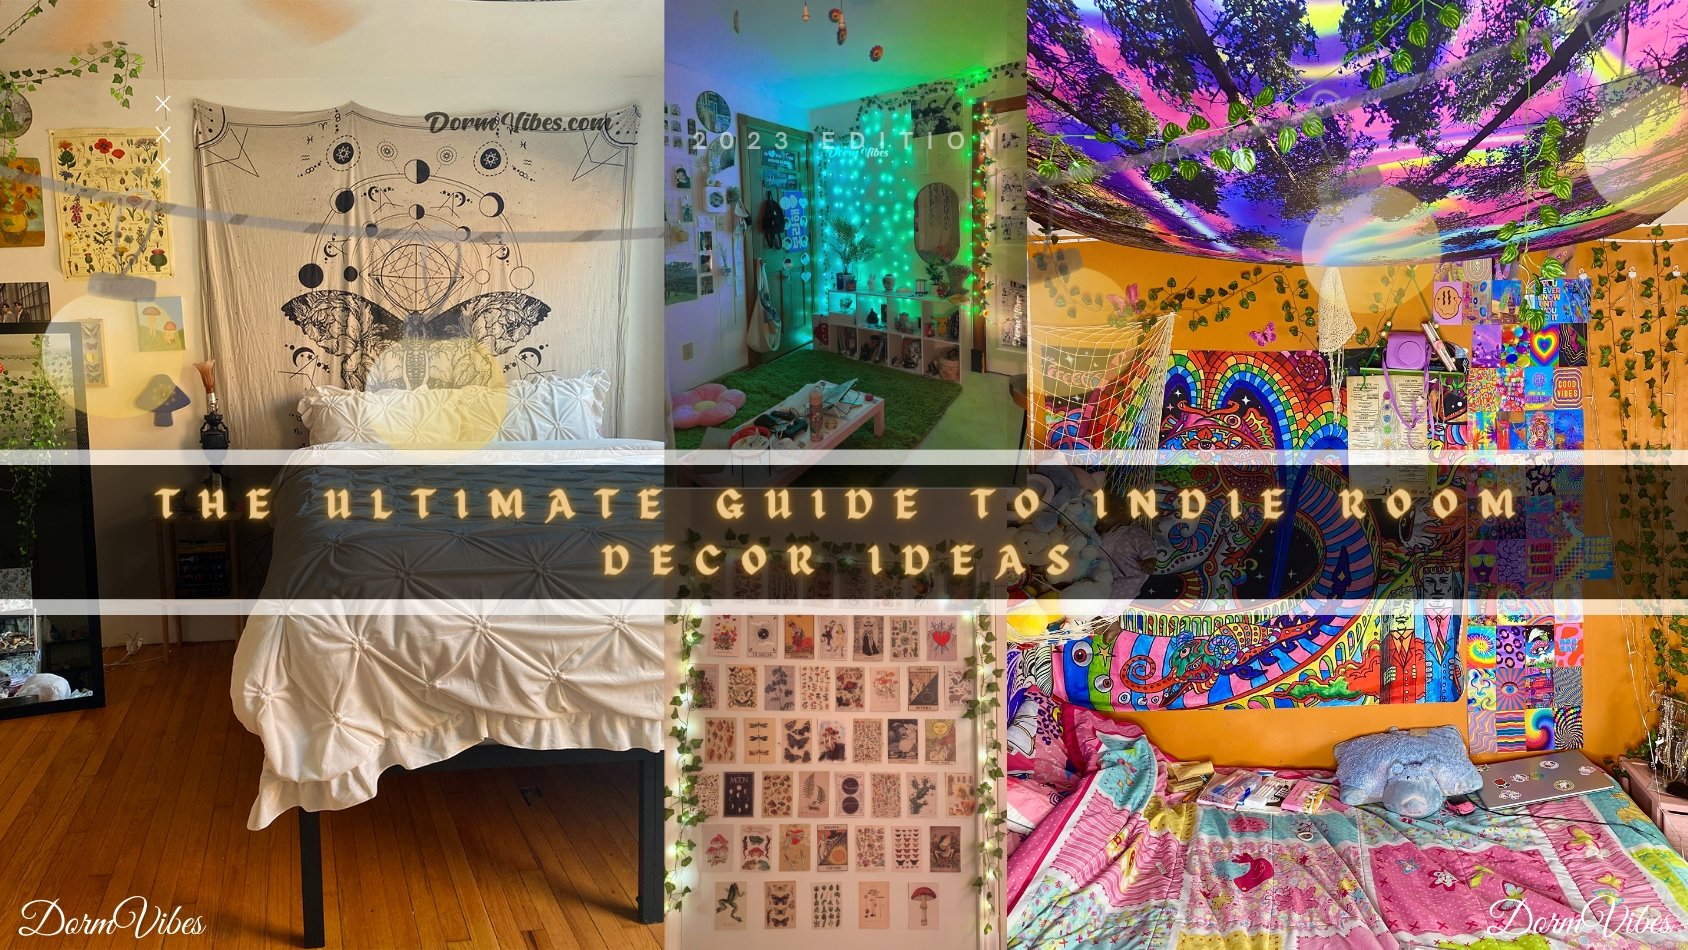 The Ultimate Guide to Indie Room Decor Ideas – DormVibes